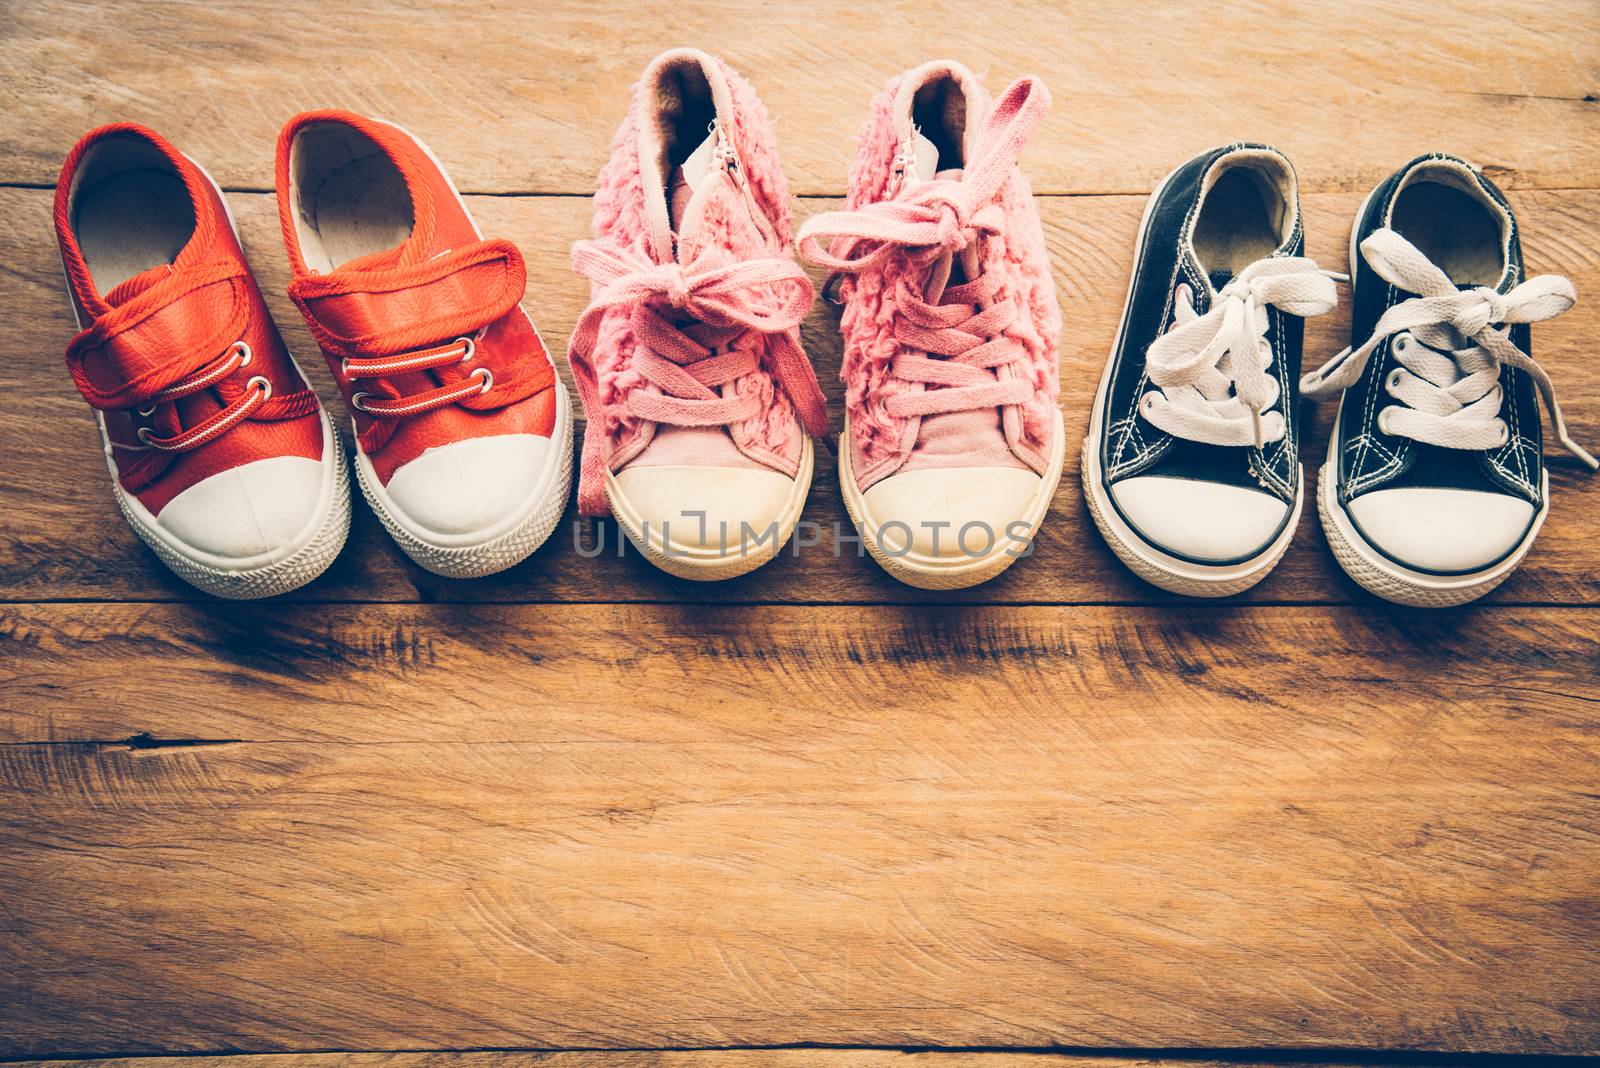 Shoes for children on wooden floor - lifestyle